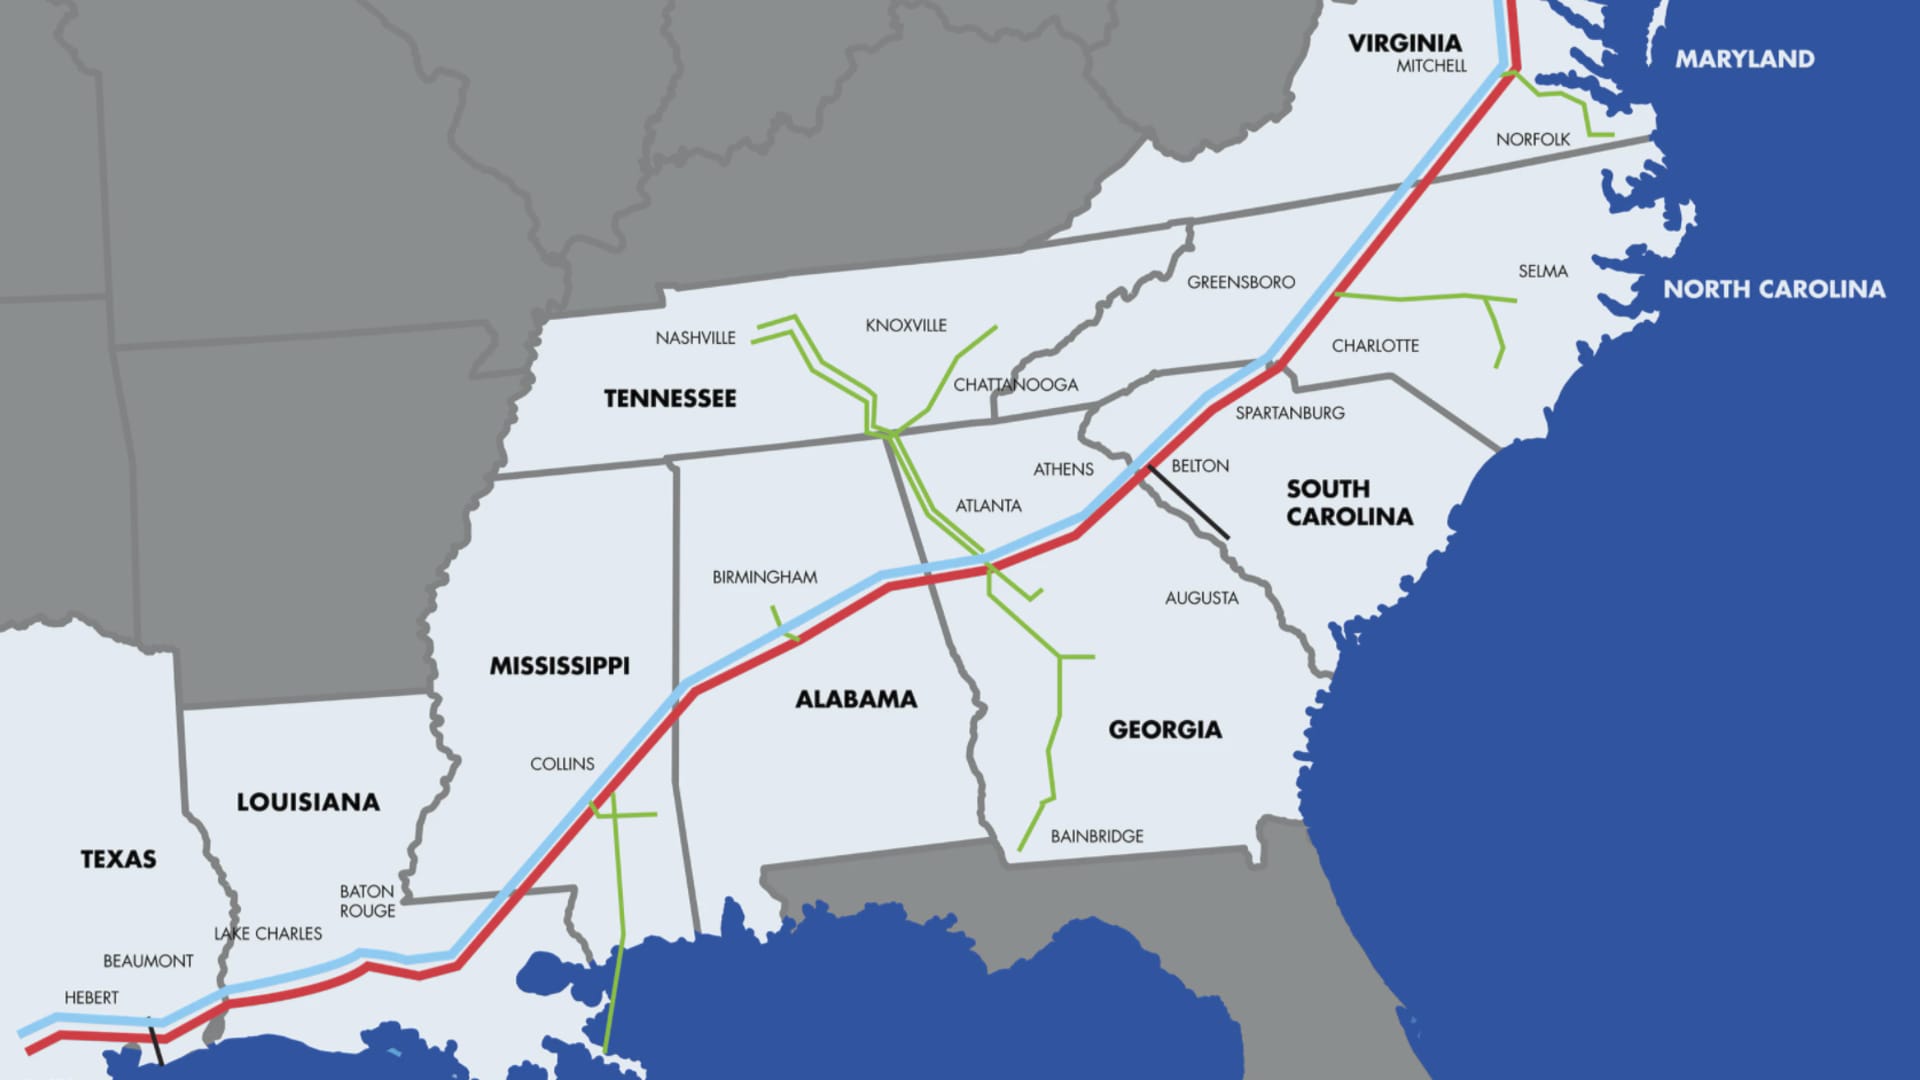 Colonial Pipelines systems map